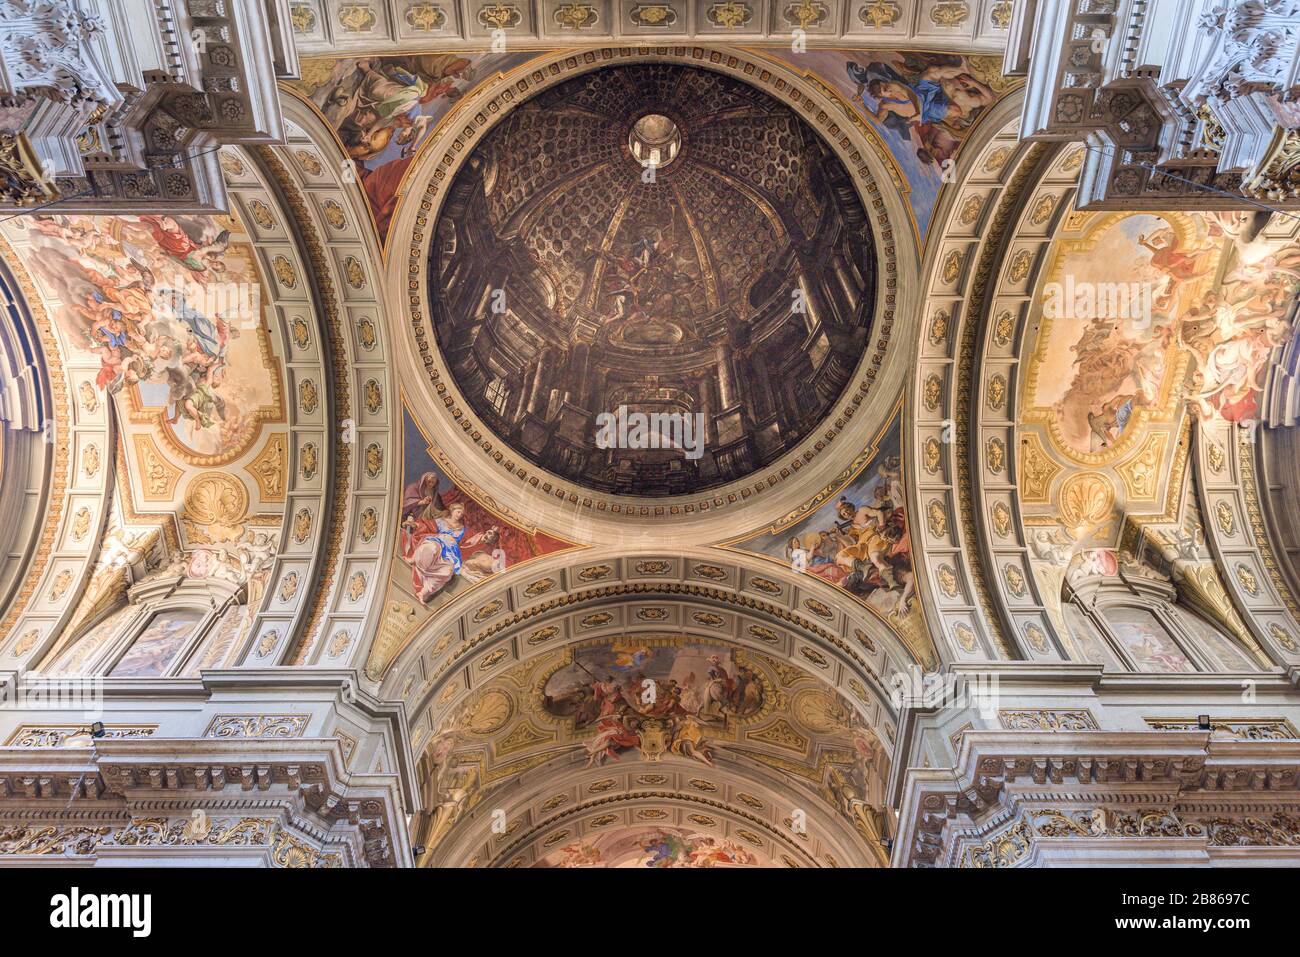 Rome, Italy - 16 Feb 2020: Painted vaults of Saint Ignatius Church in Rome, Italy, with trompe-l'oeil perspective by Renaissance painter Andrea Pozzo Stock Photo